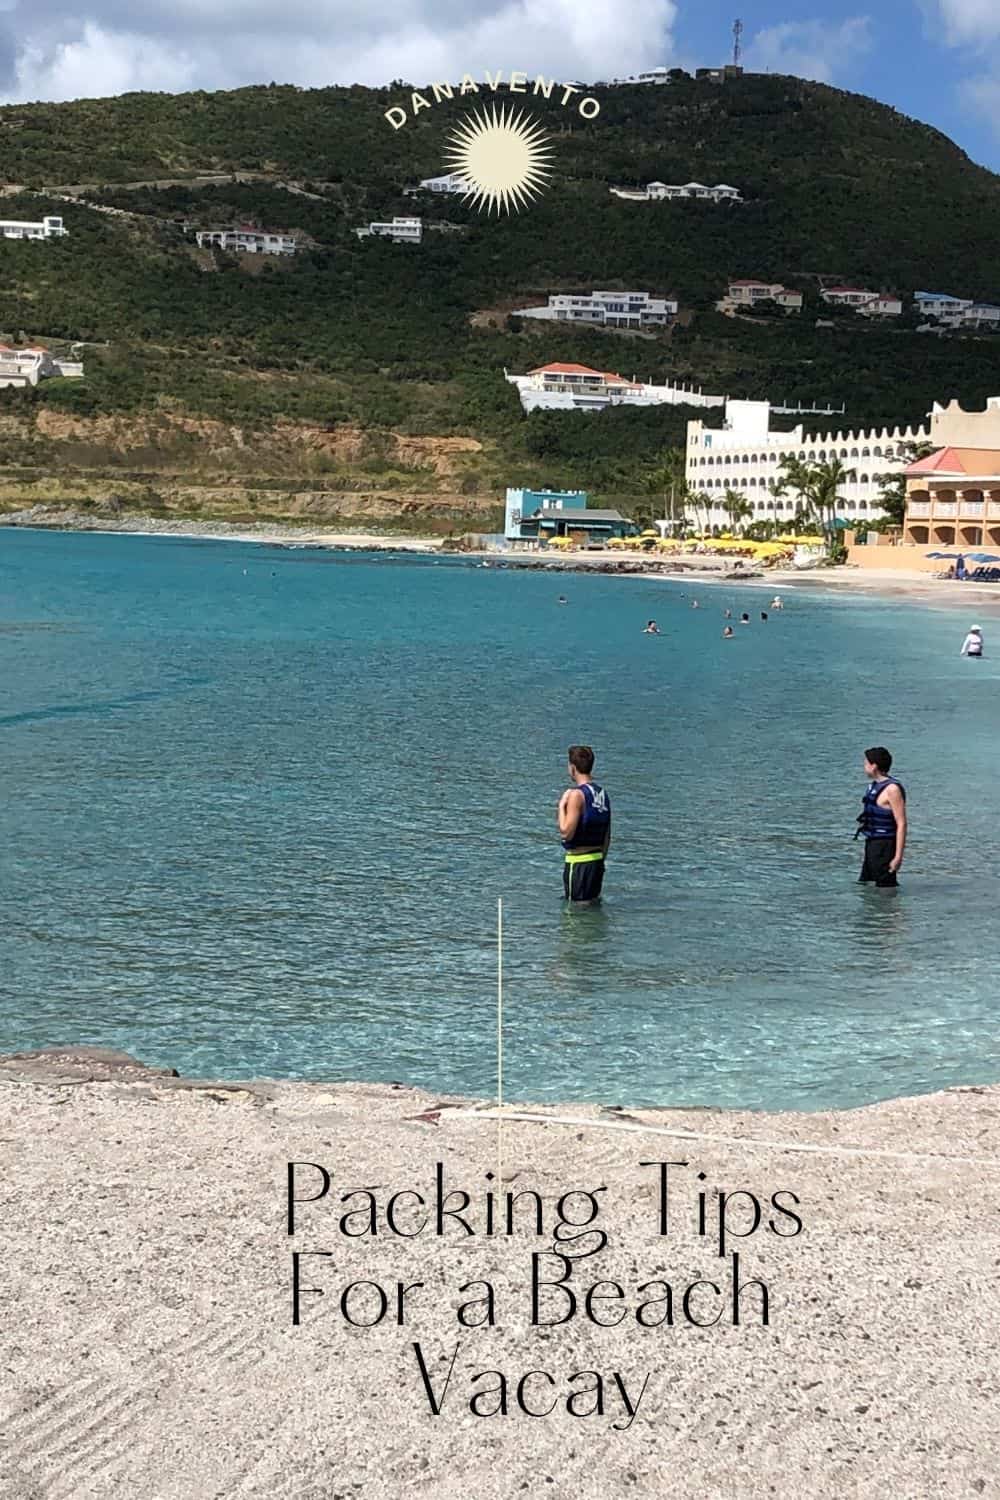 Beach Packing Tips for Vacay